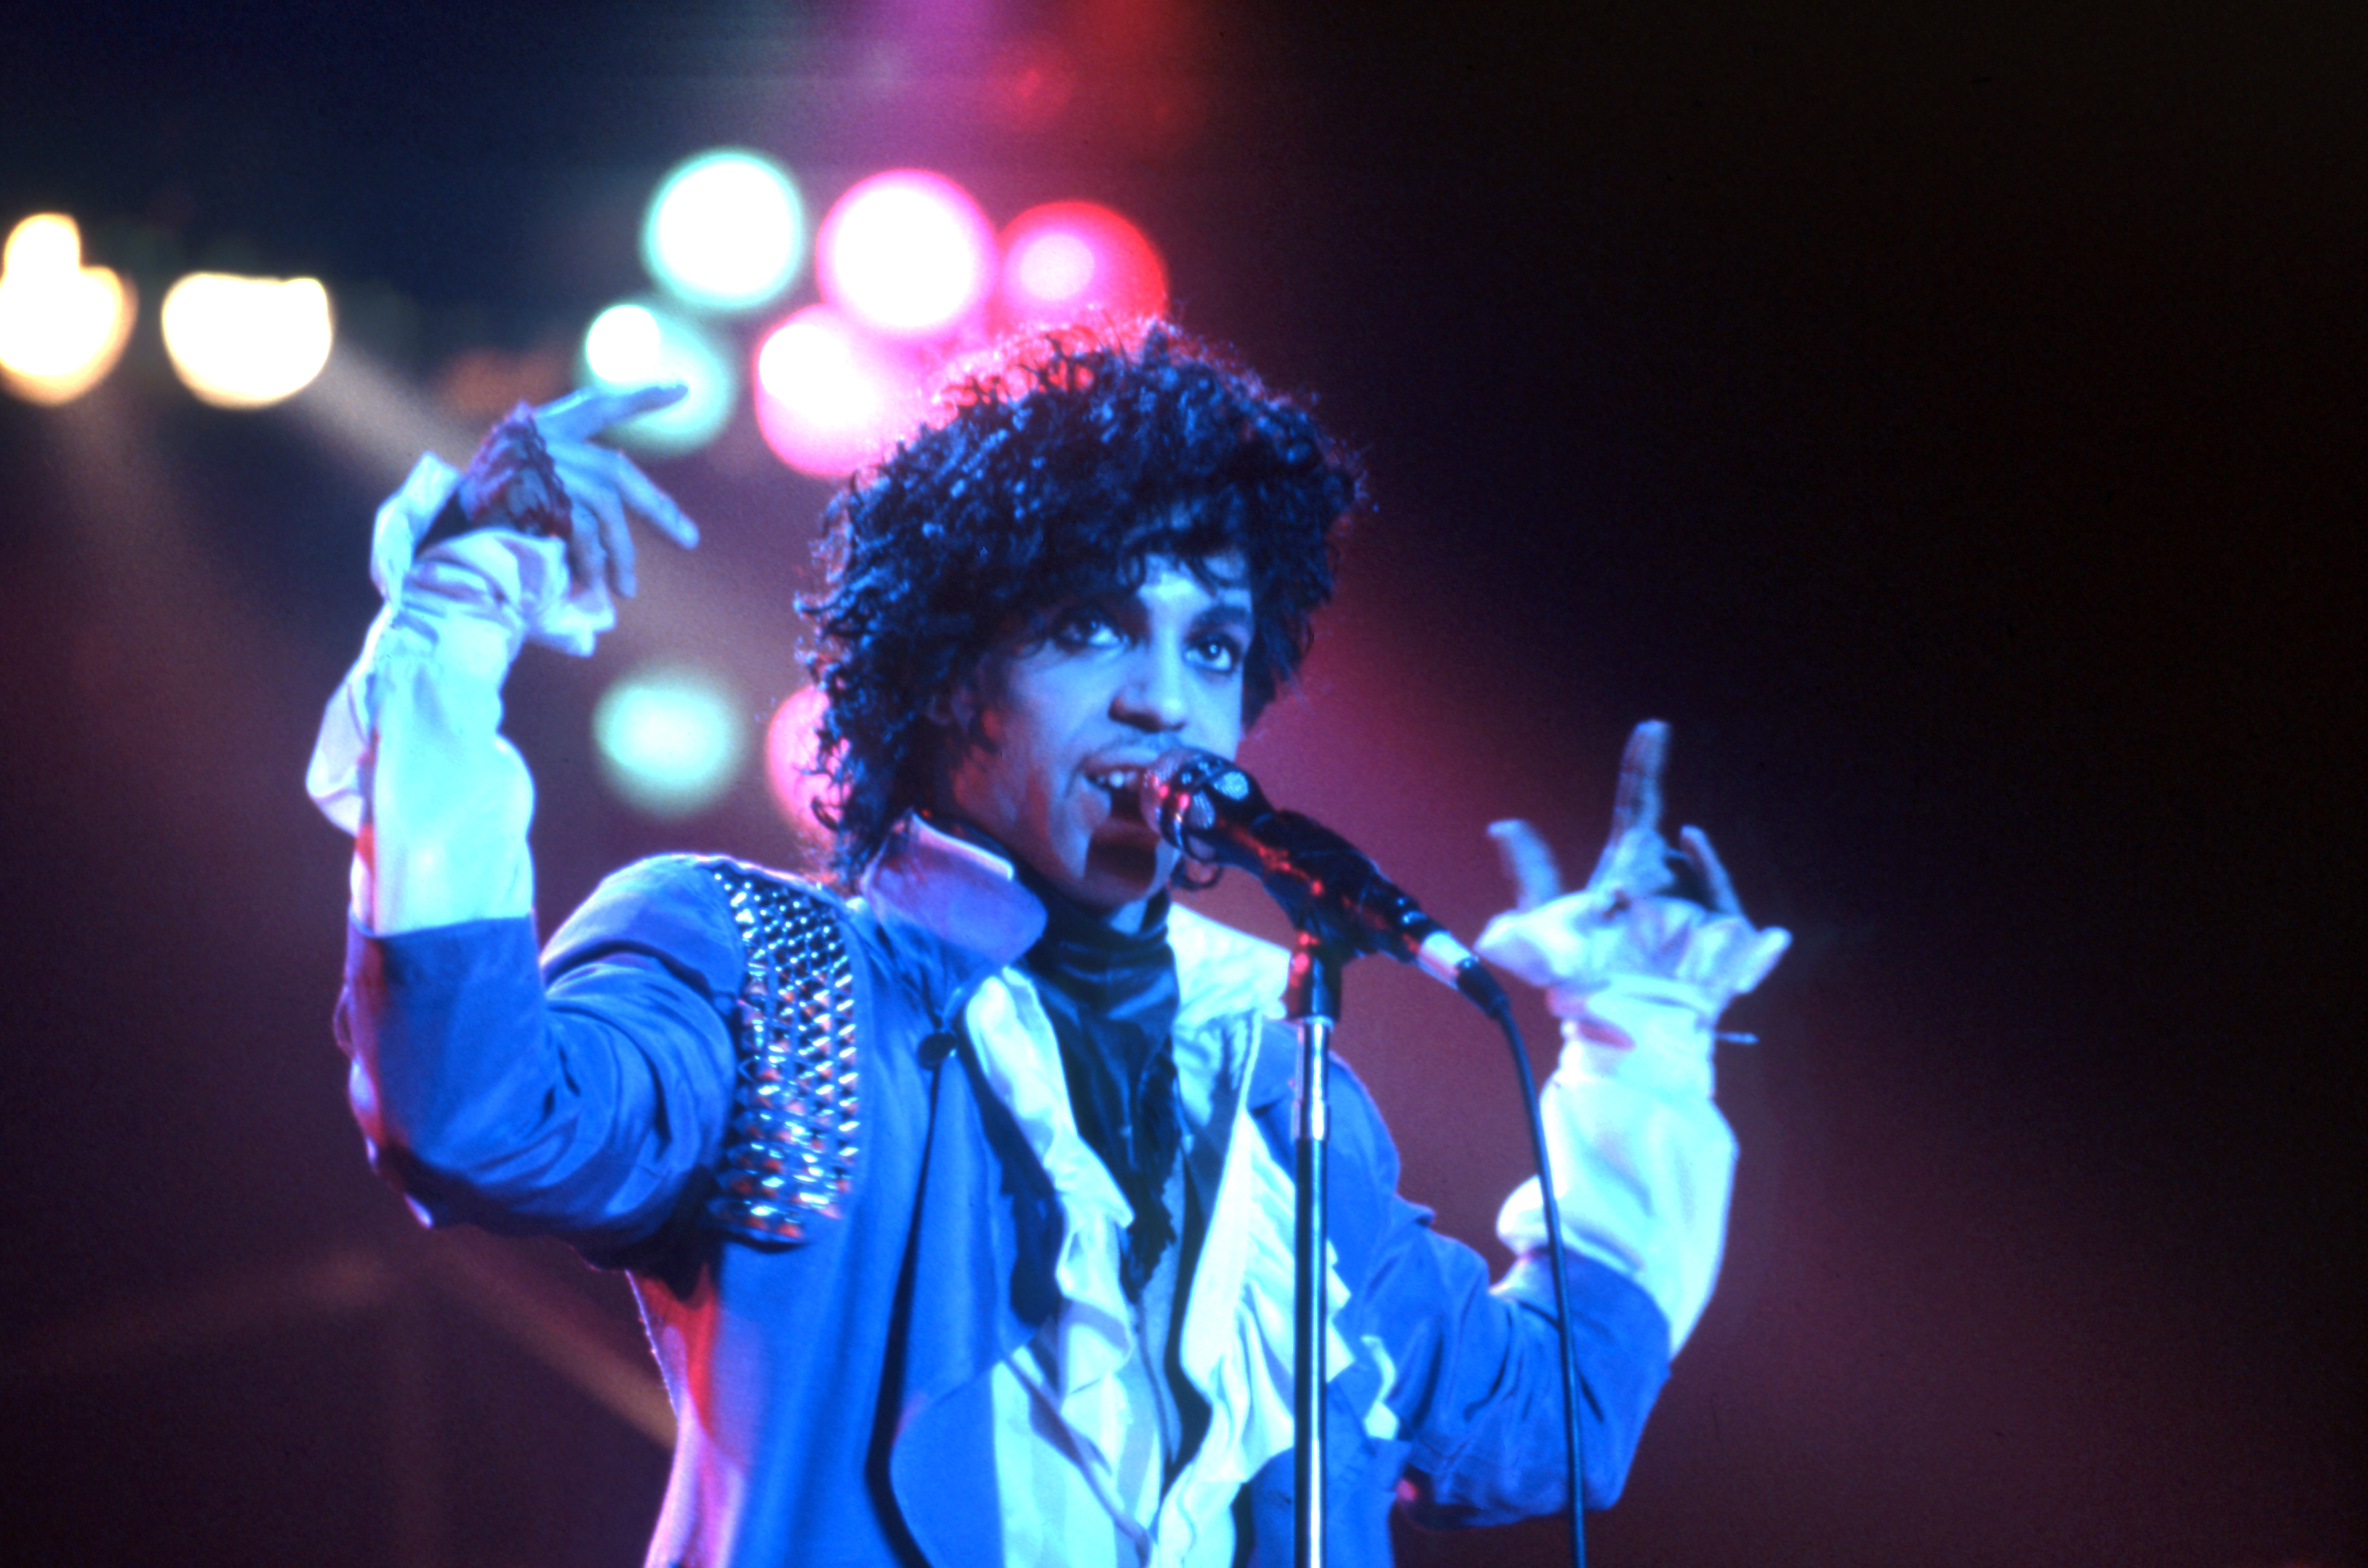 Prince performing during the "Purple Rain" tour in November 4,1984 in Detroit, Michigan | Source: Getty Images